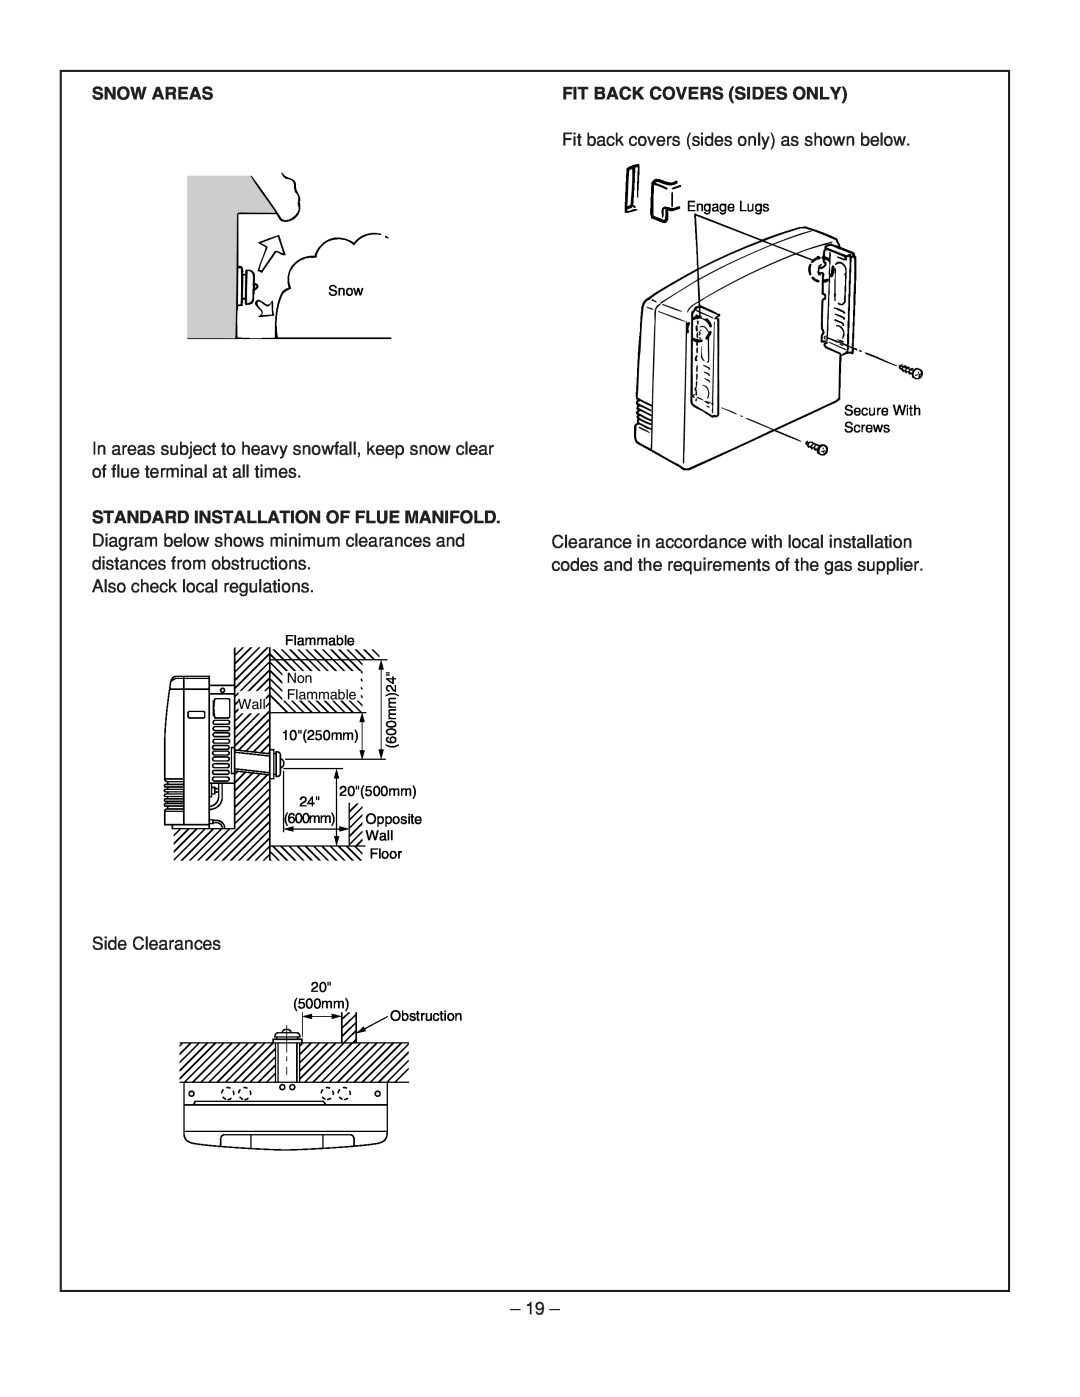 Rinnai RHFE-431FA installation manual Snow Areas, Standard Installation Of Flue Manifold, Fit Back Covers Sides Only 